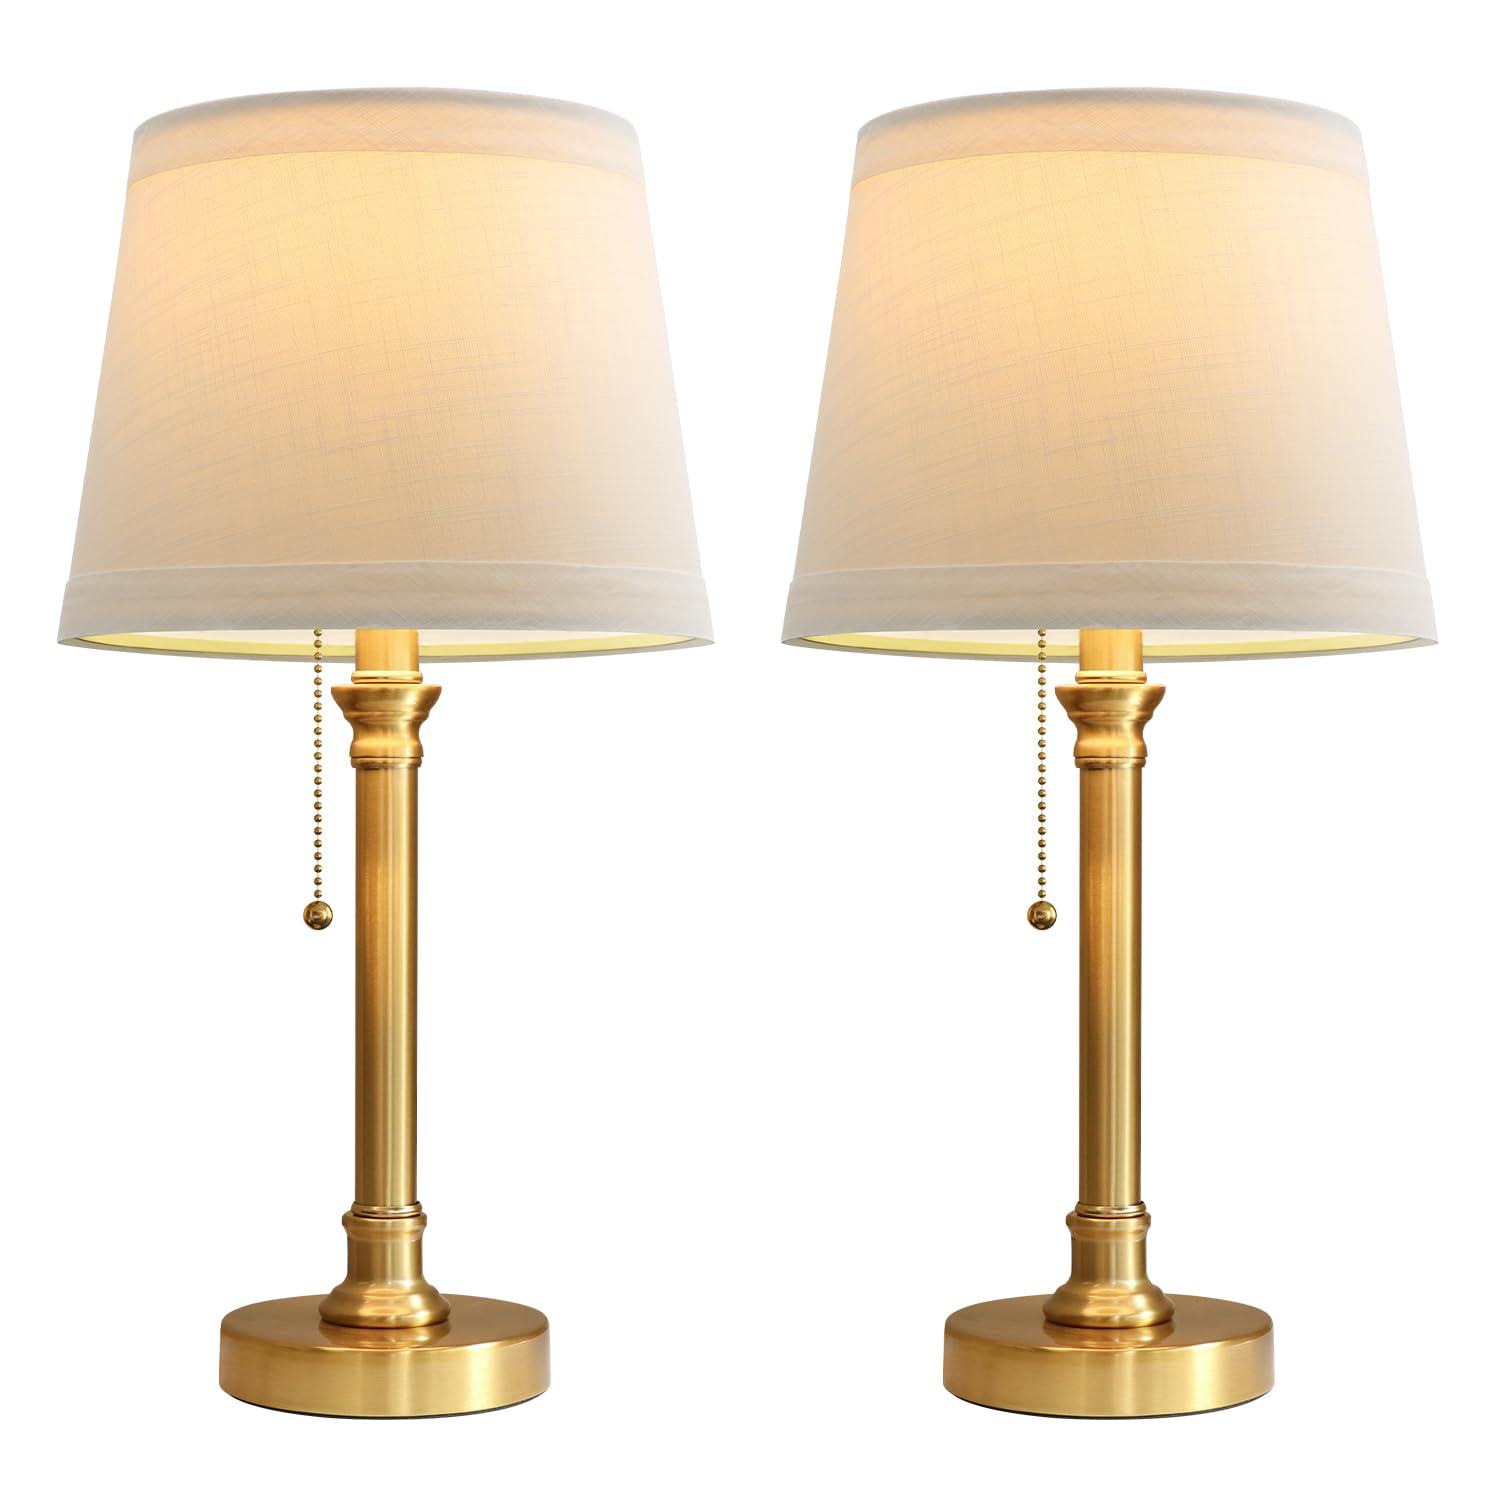 Oneach Modern Gold Brass Table Lamp Set of 2 for Bedroom Living Room 19.75'' Traditional Bedside Desk Nightstand Buffet Candlestick Samll Lamps with White Drum Shade